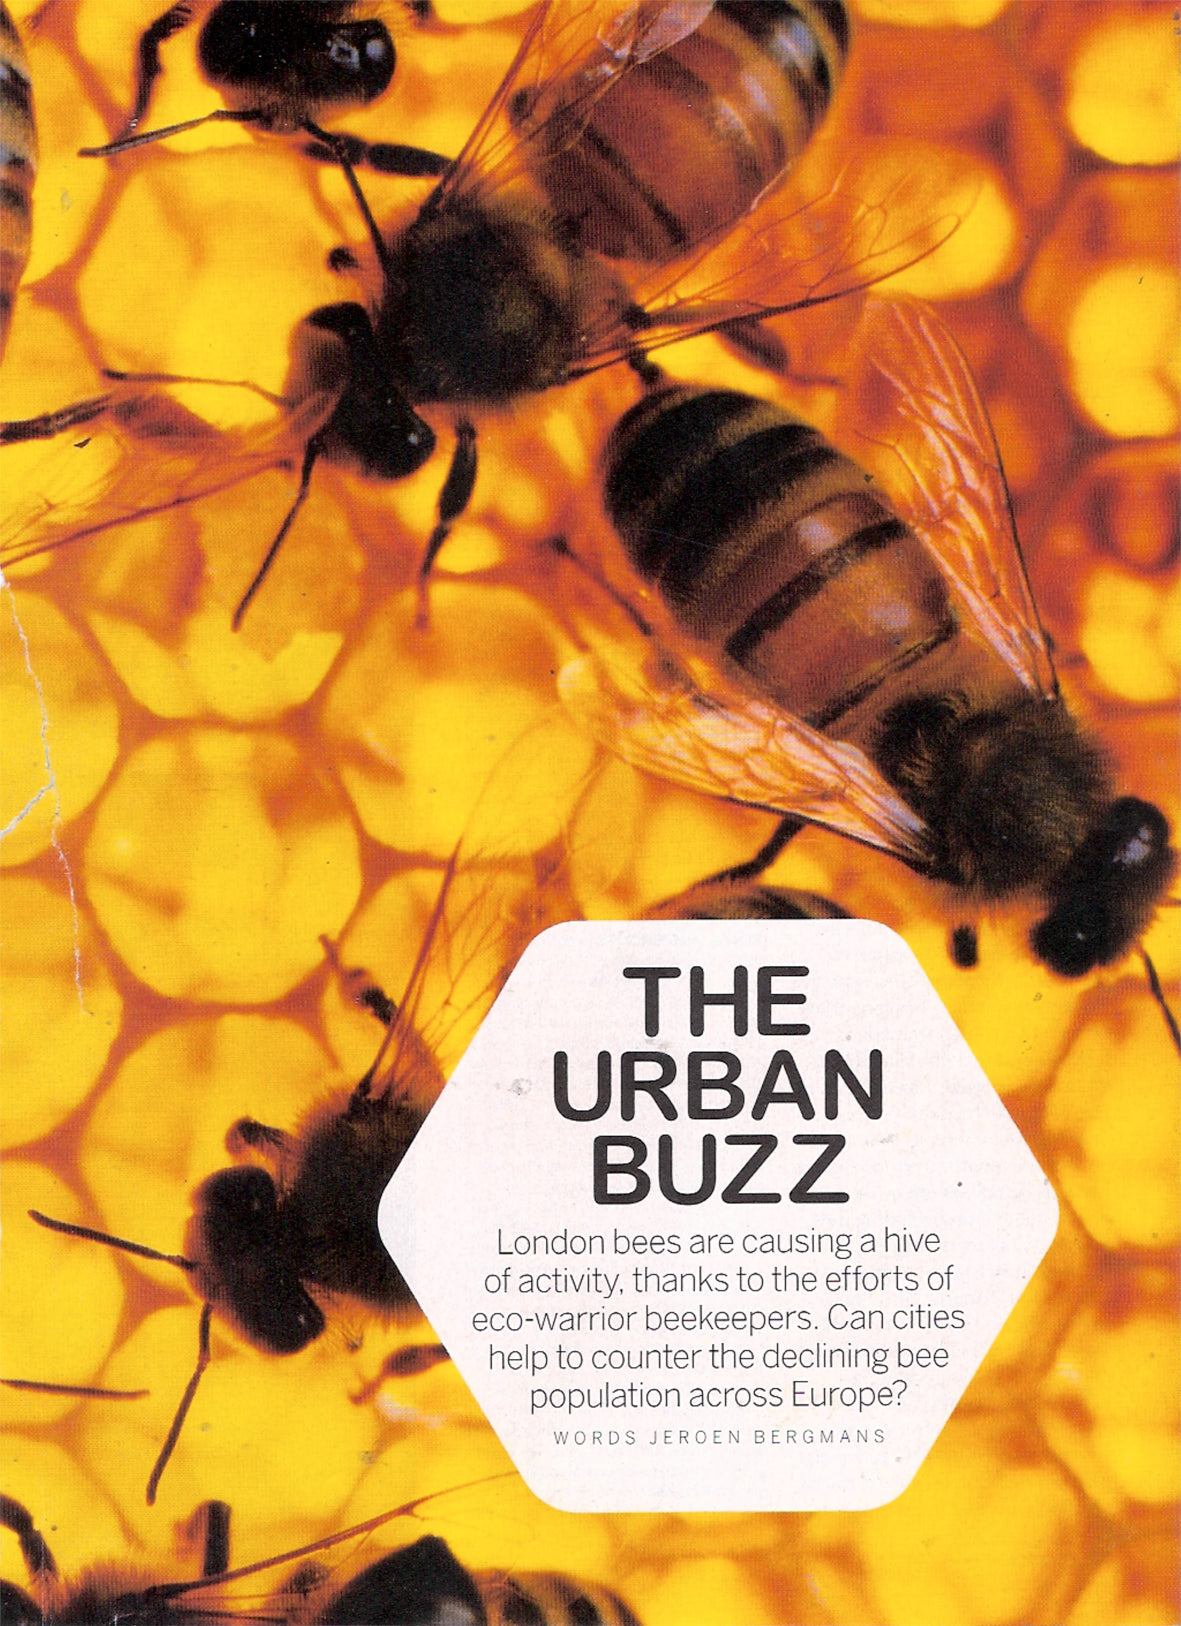 The Urban Buzz - article on beekeeping in London